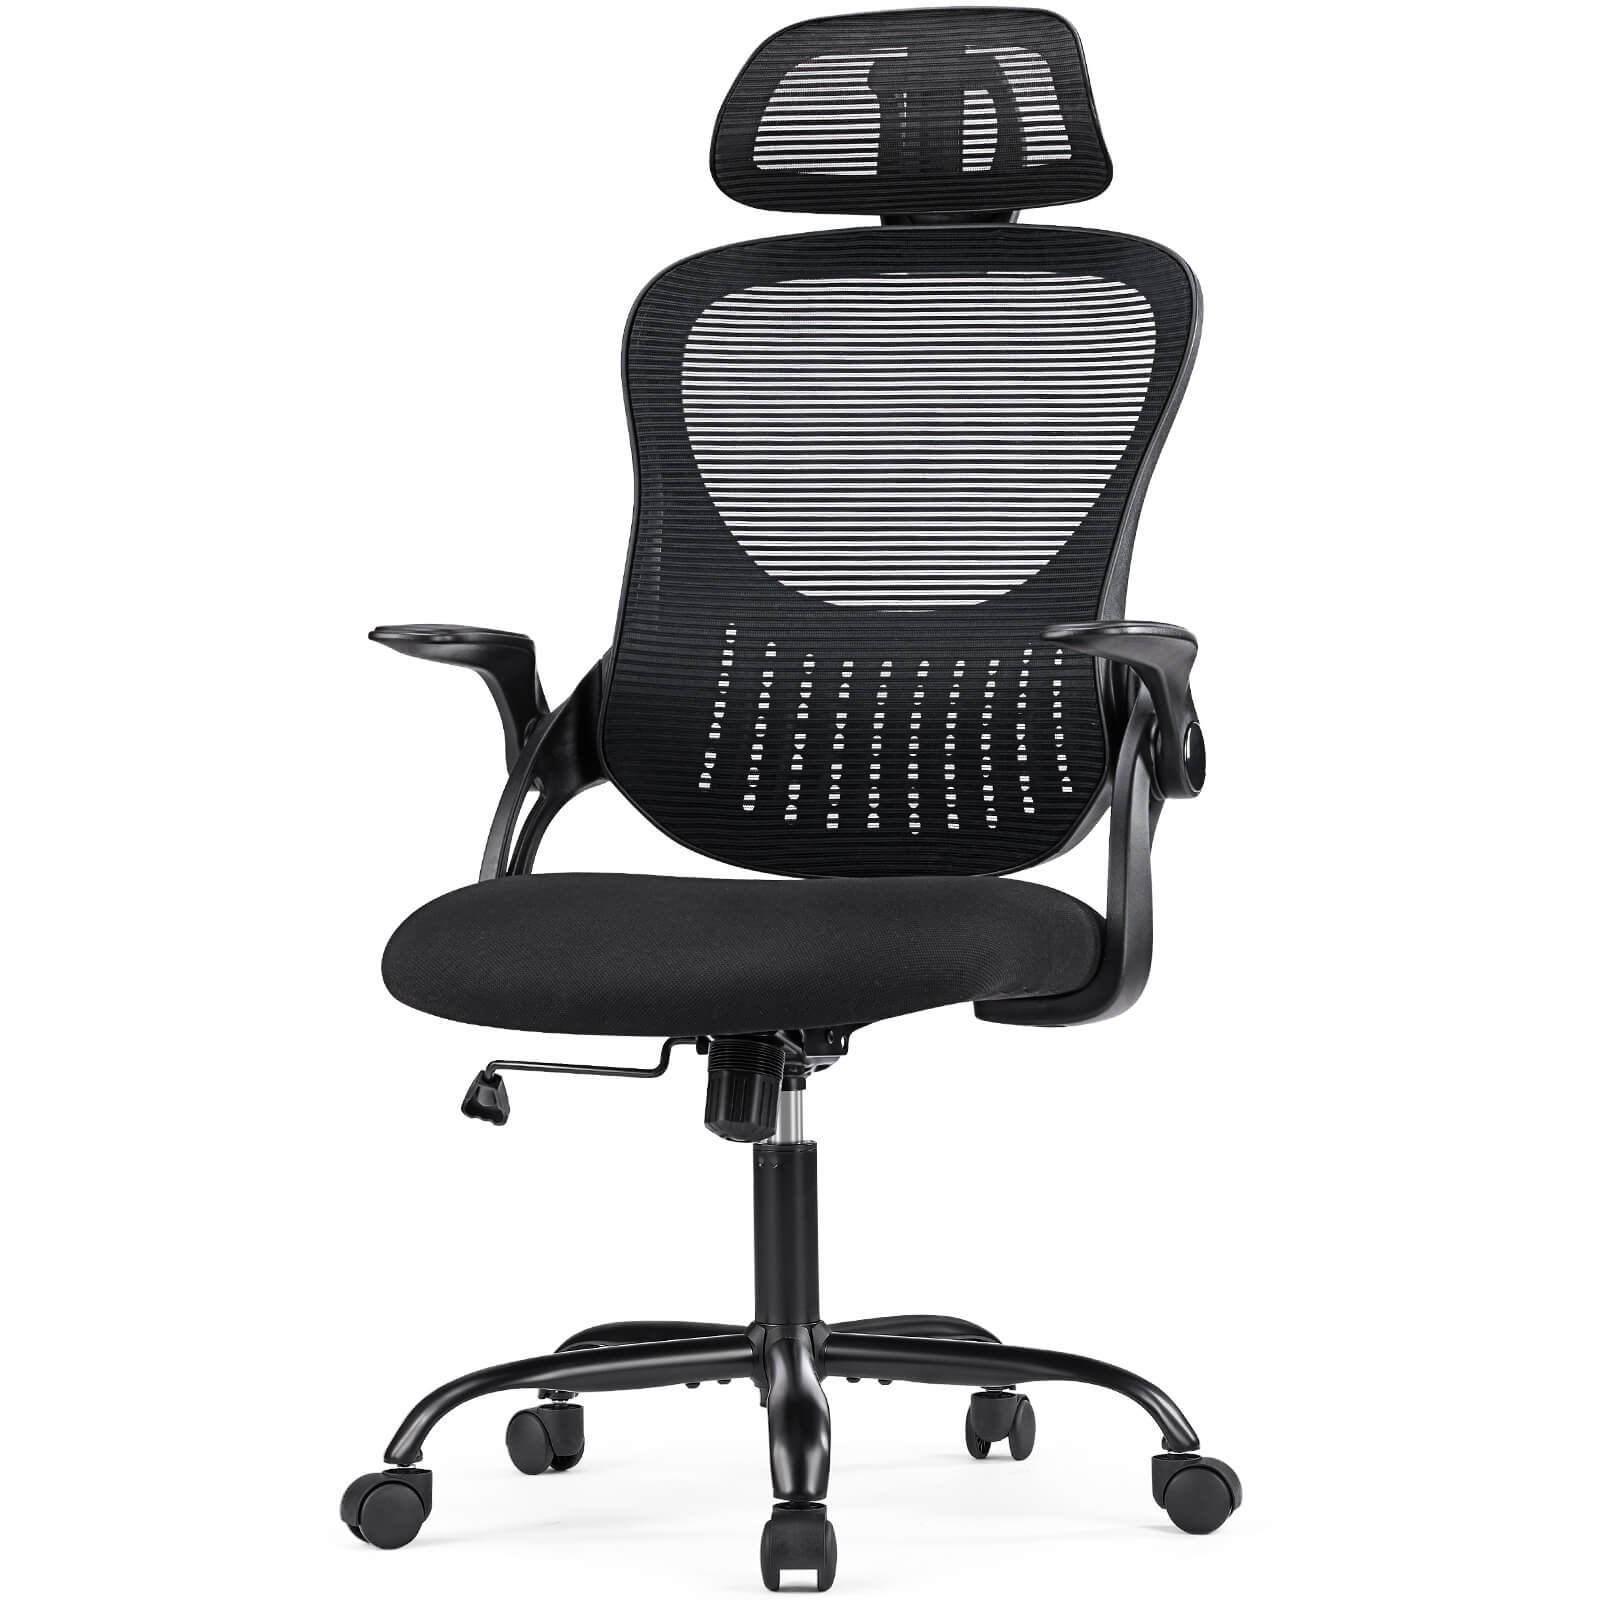 Ergonomic office chair - high back with wheels, adjustable headrest and flip-up armrests for bedroom, study, living room, office